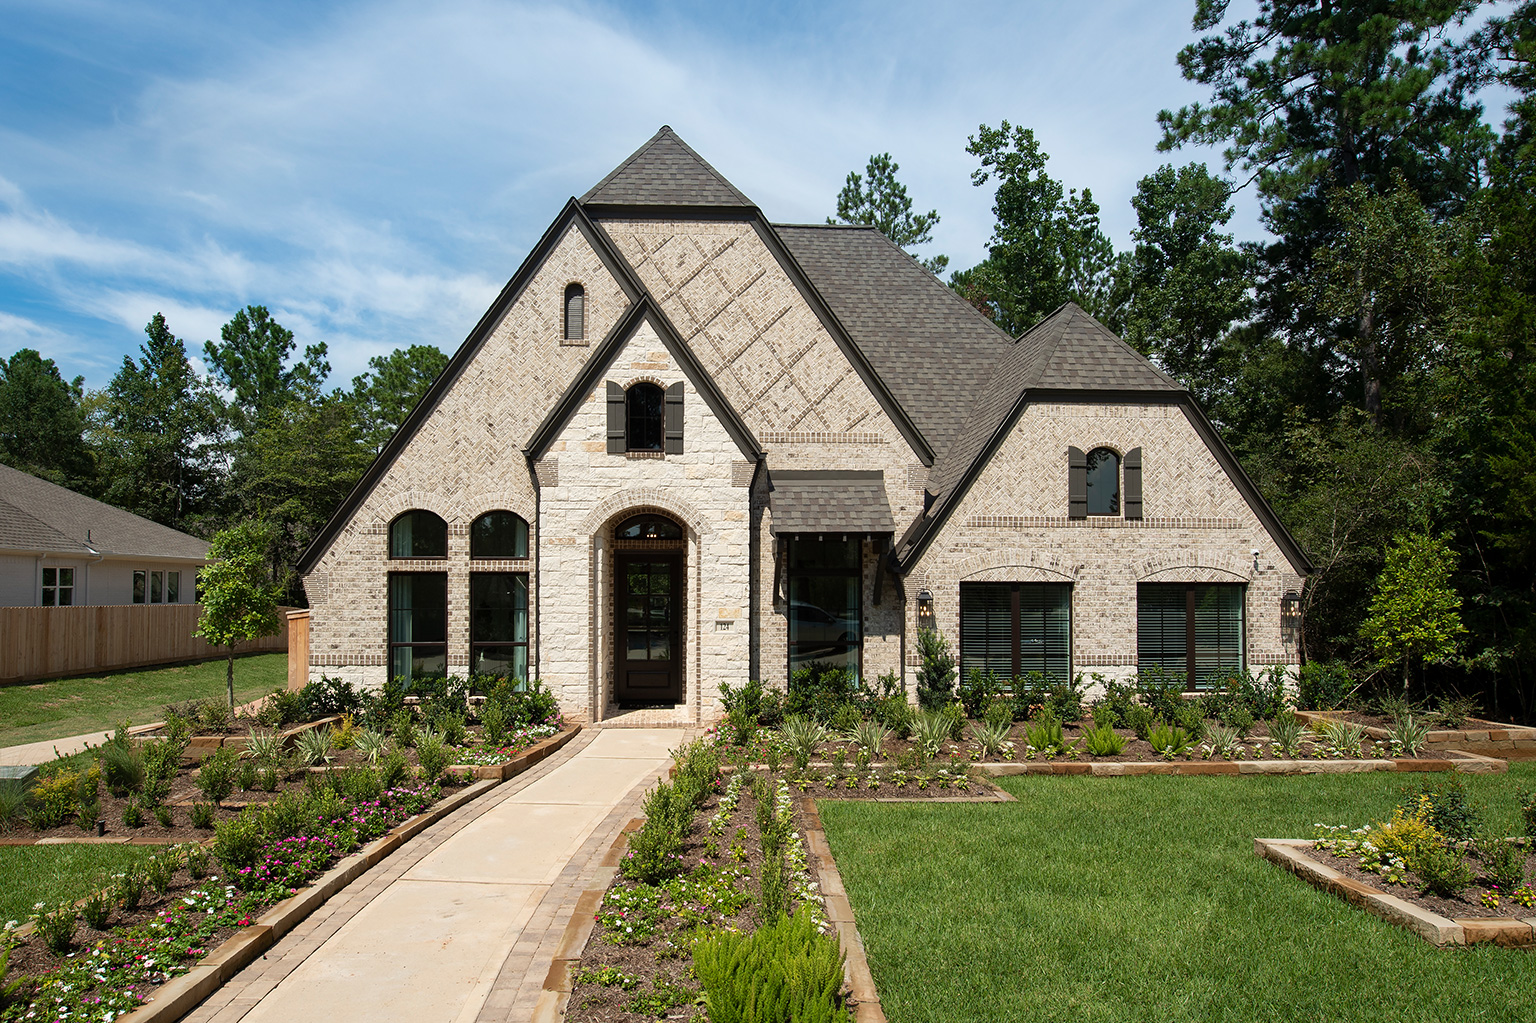 Enjoy Up to $10,000 in Spring Incentives for New Homes Purchased in The Woodlands Hills Now Through May 31